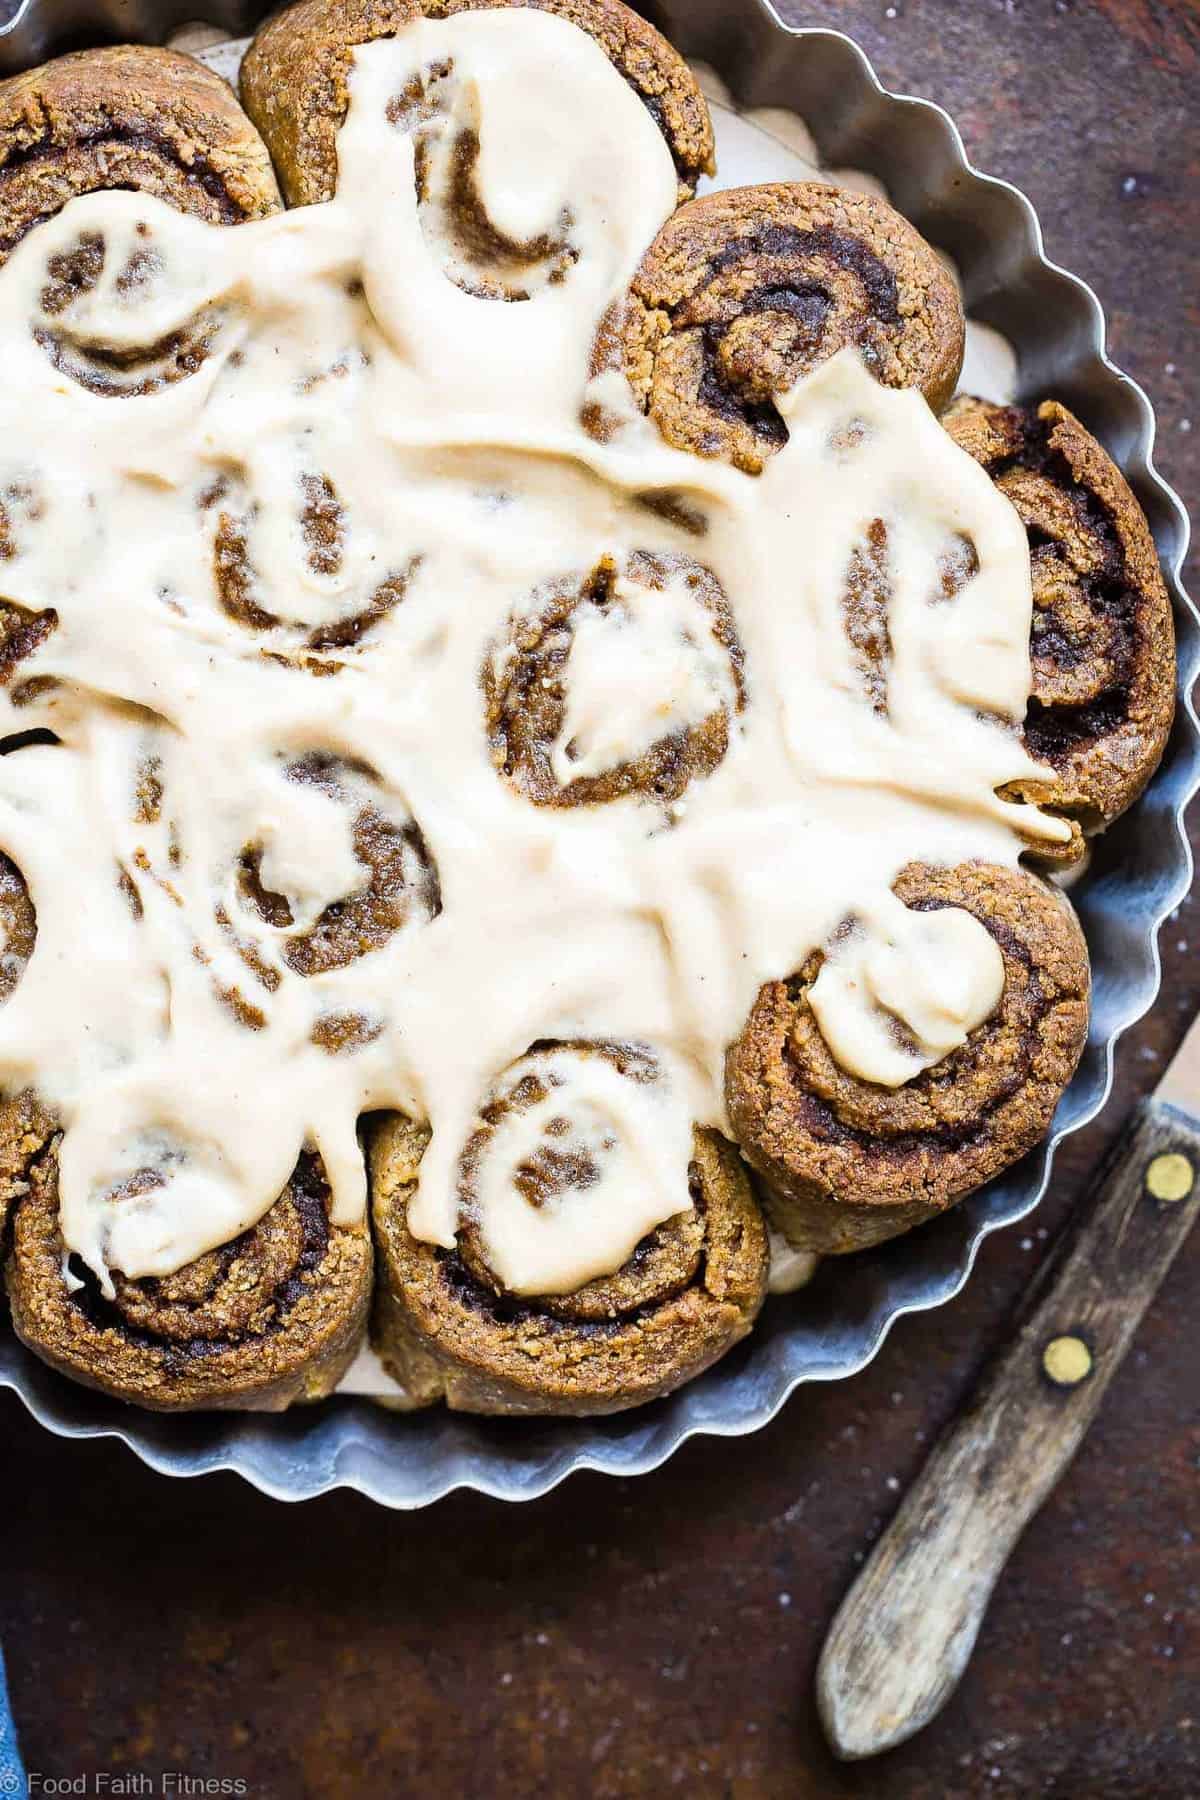 The Best Paleo Cinnamon Rolls - These gluten free cinnamon rolls are a simple, wholesome remake of the classic baked good that you can't even tell is healthy, and gluten/dairy free! SO soft, fluffy and YUMMY! | #Foodfaithfitness | #Paleo #Glutenfree #Healthy #Dairyfree #Cinnamonrolls